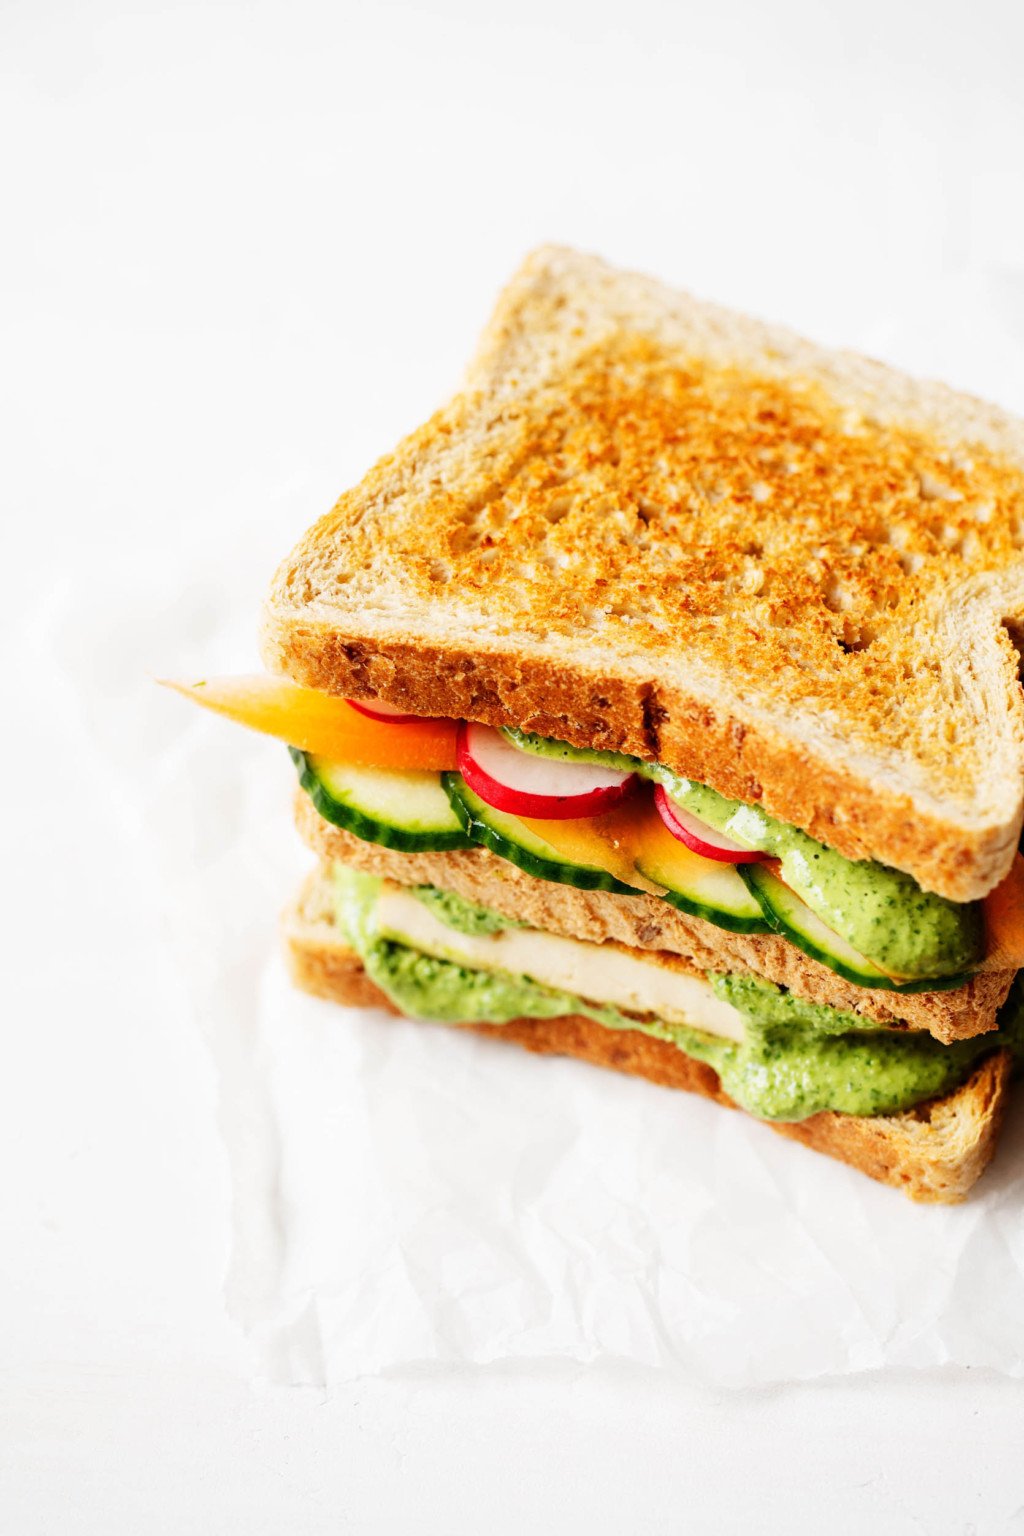 A three layered, plant based sandwich with vegetables and tofu is placed on a small piece of parchment.